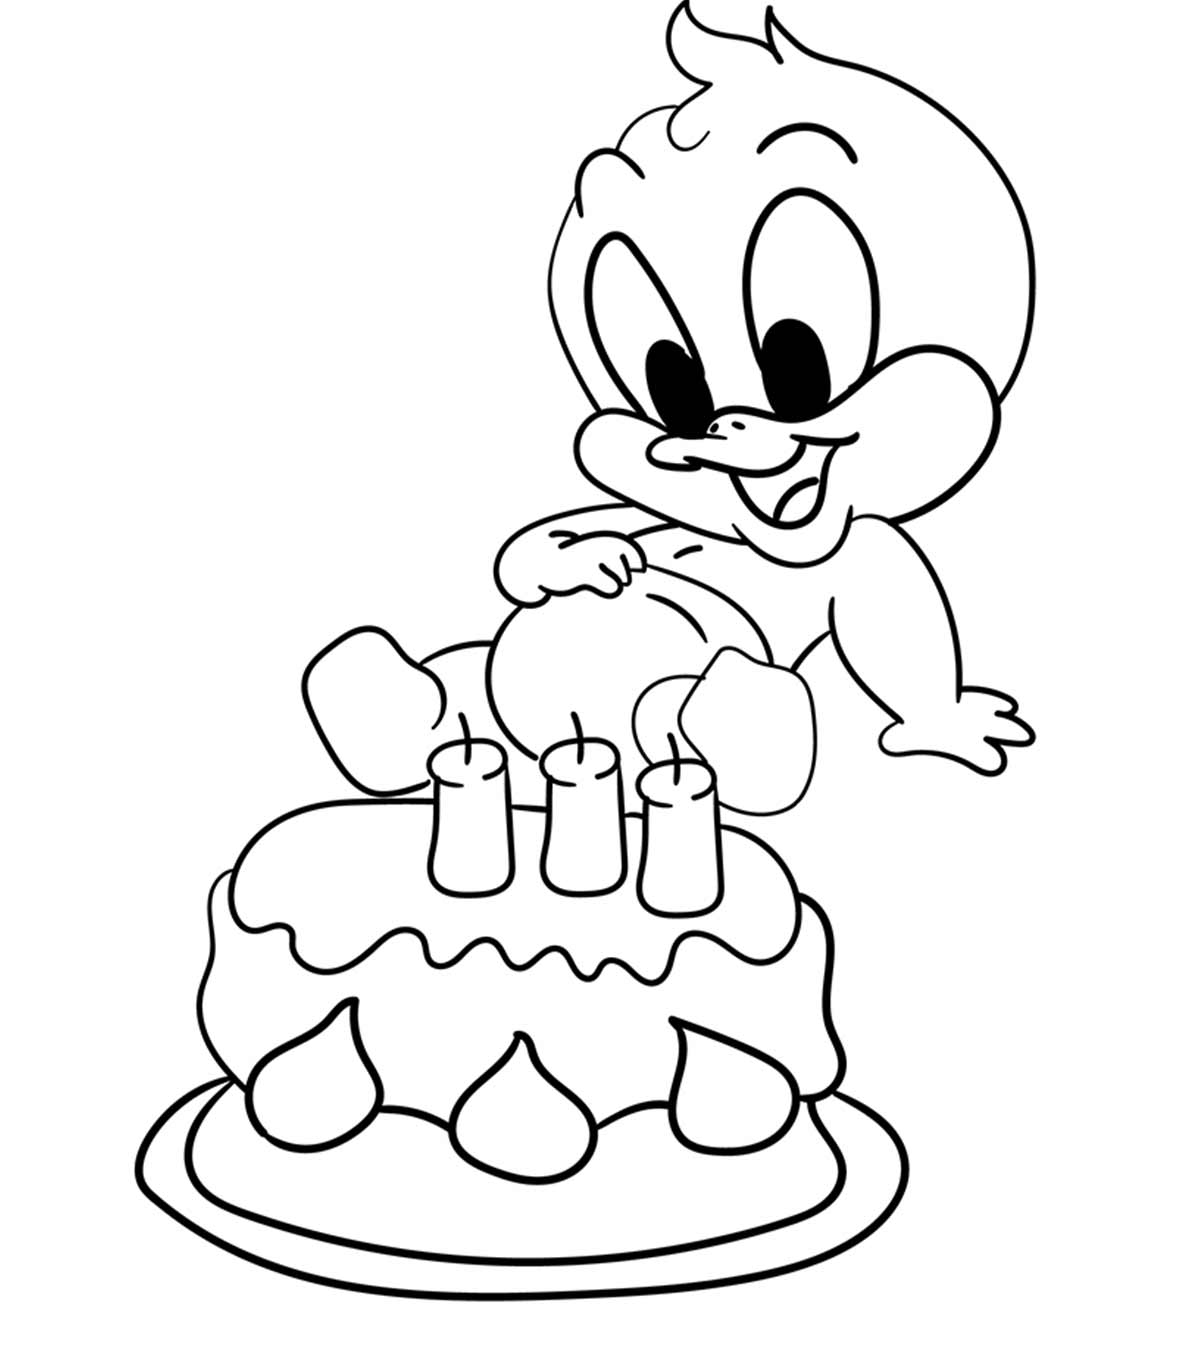 Top 22 Daffy Duck Coloring Pages For Kids